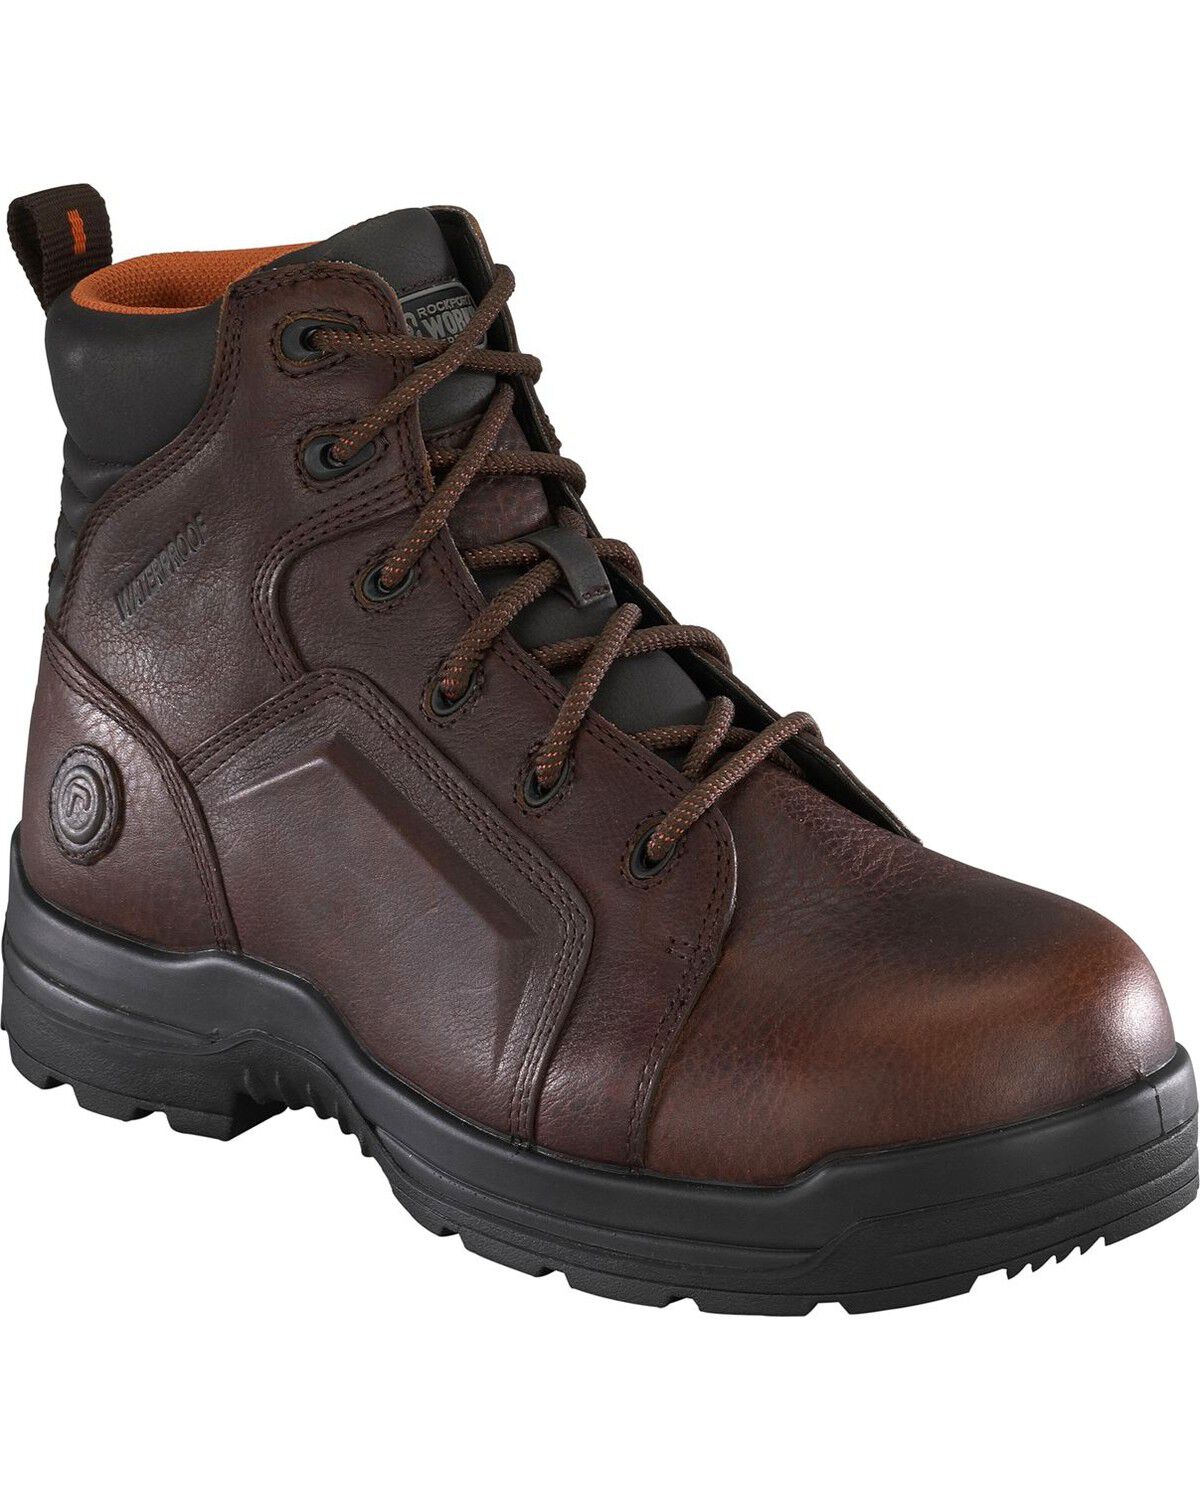 Rockport Works Women’s Leather Steel Toe EH Hiking Work Boots US 6 M  RK620 